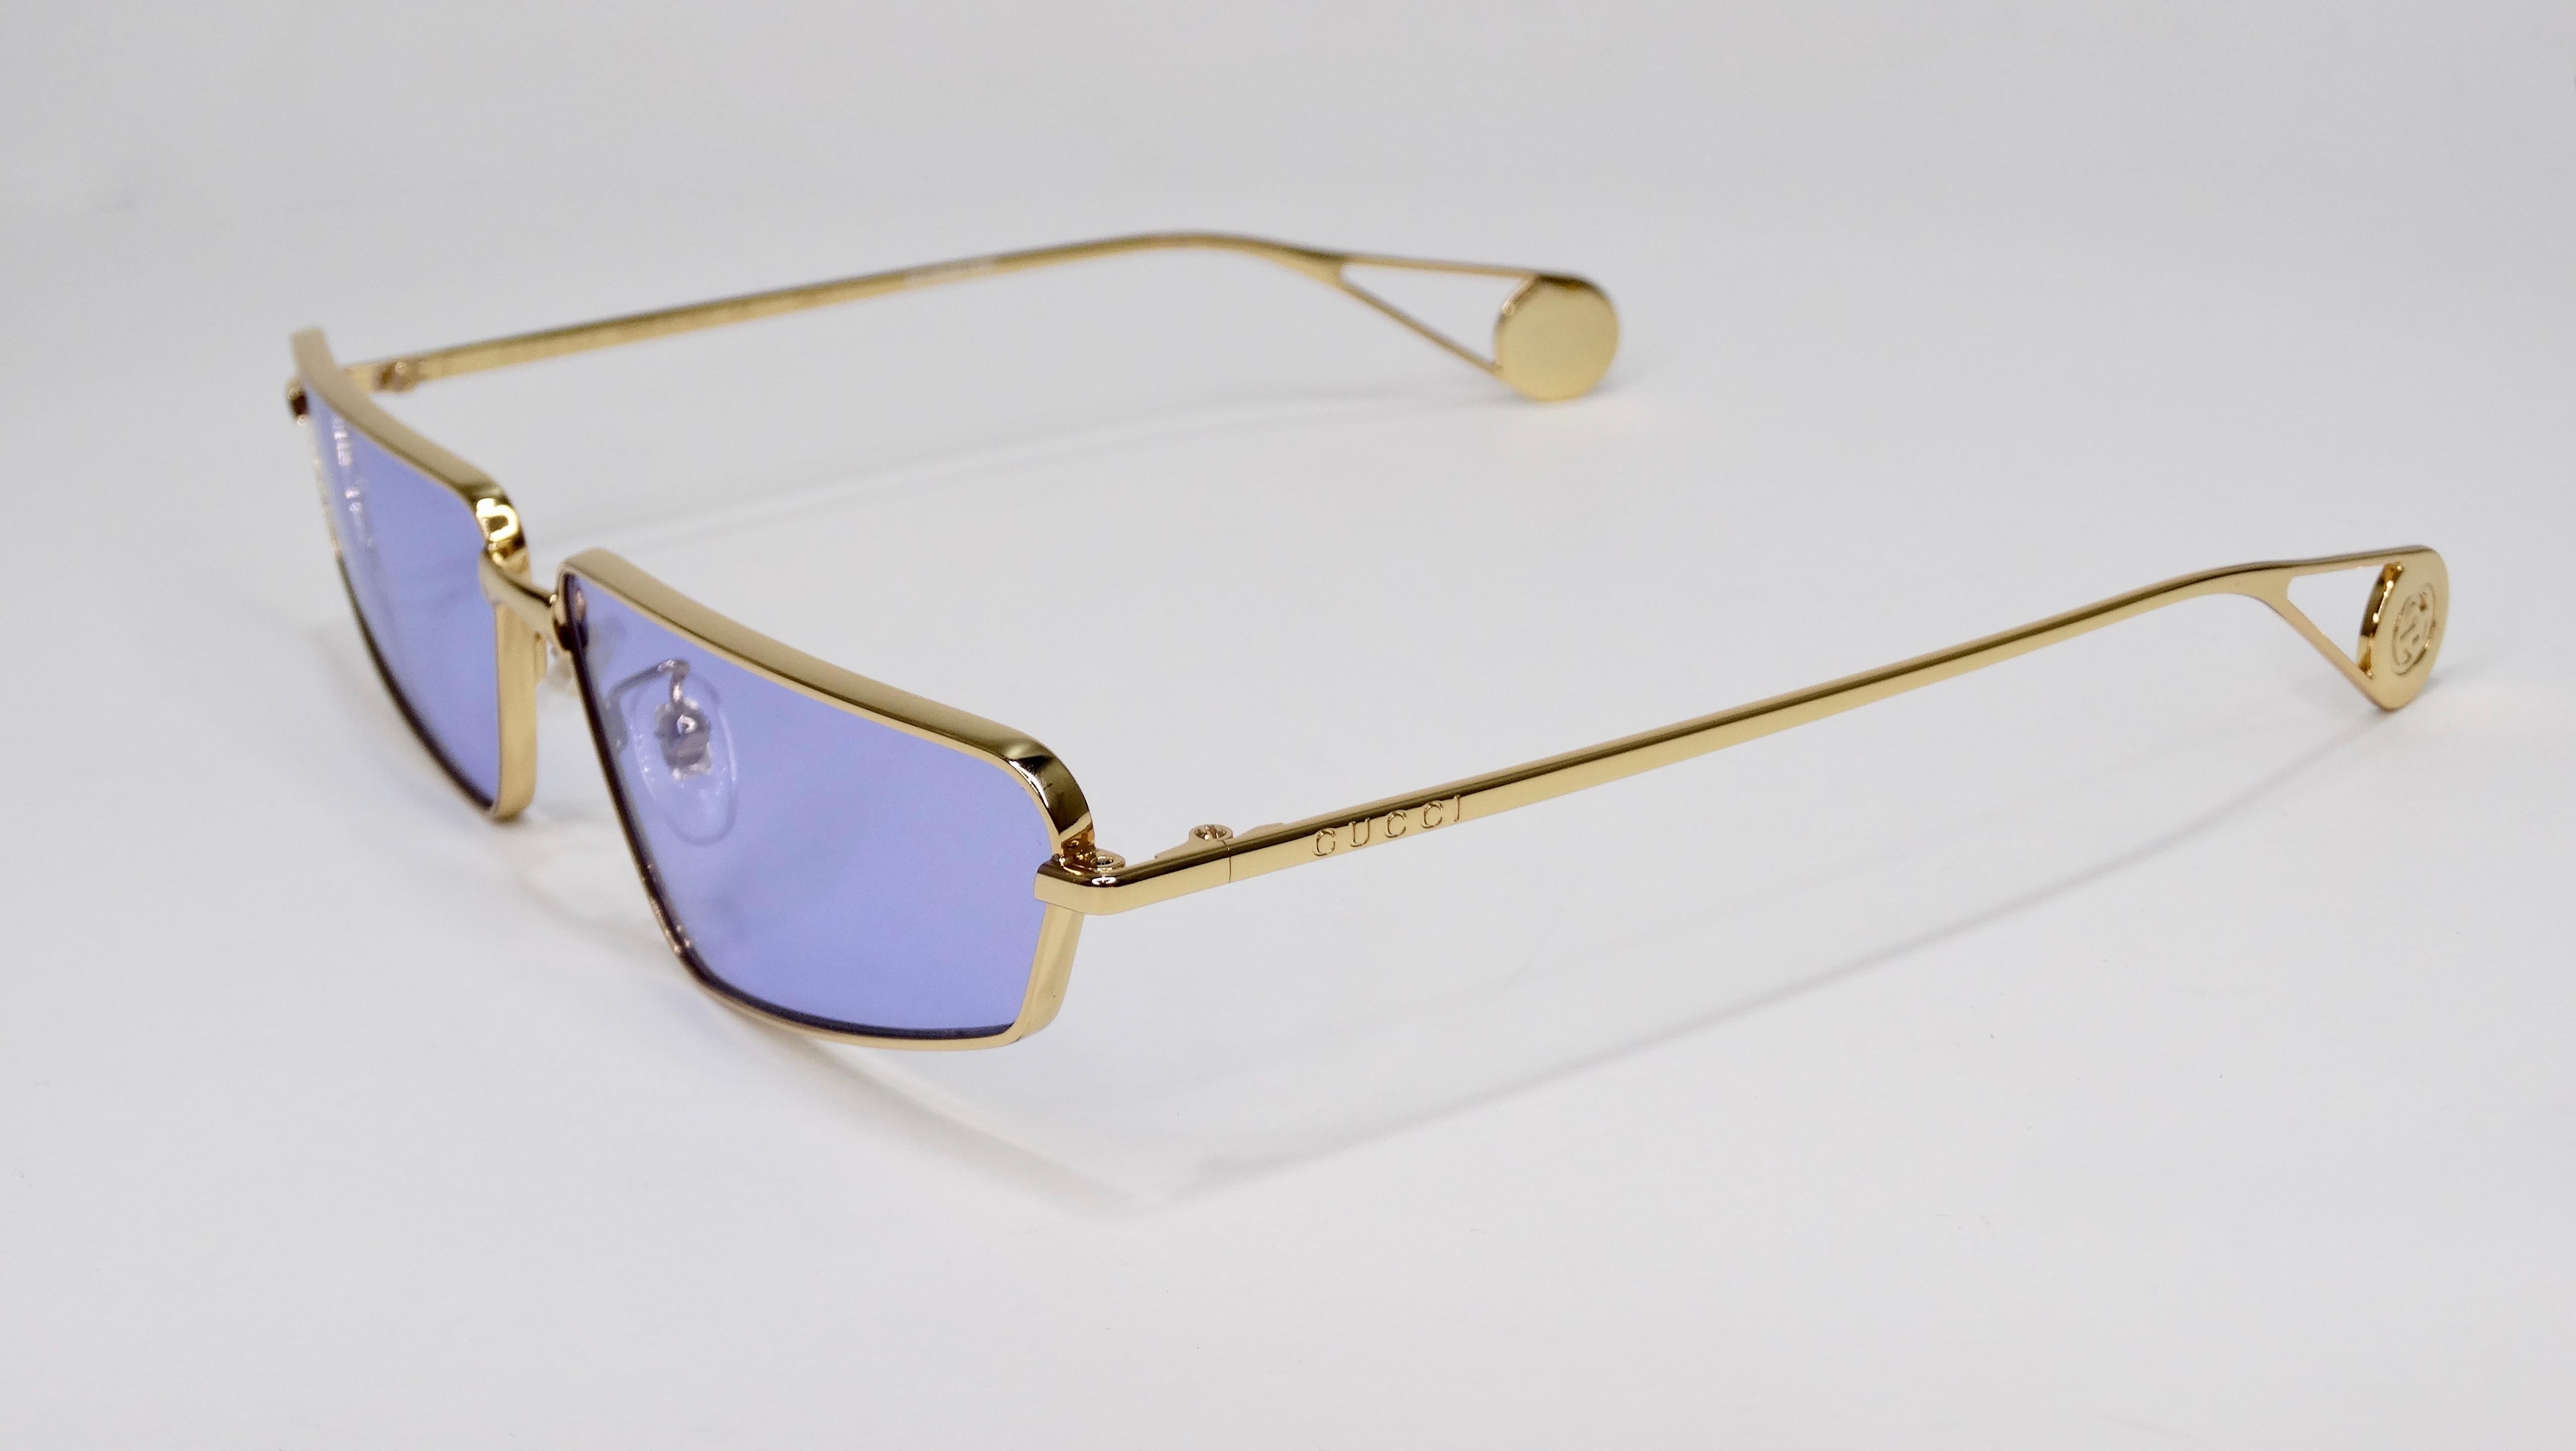 Snag yourself these Gucci sunnies! Circa recent 2000s, these edgy sunglasses feature a gold toned cat eye frame with blue lenses. Comes with original case. Base of arms embossed with the original interlocking GG logo. Perfect to pair with your